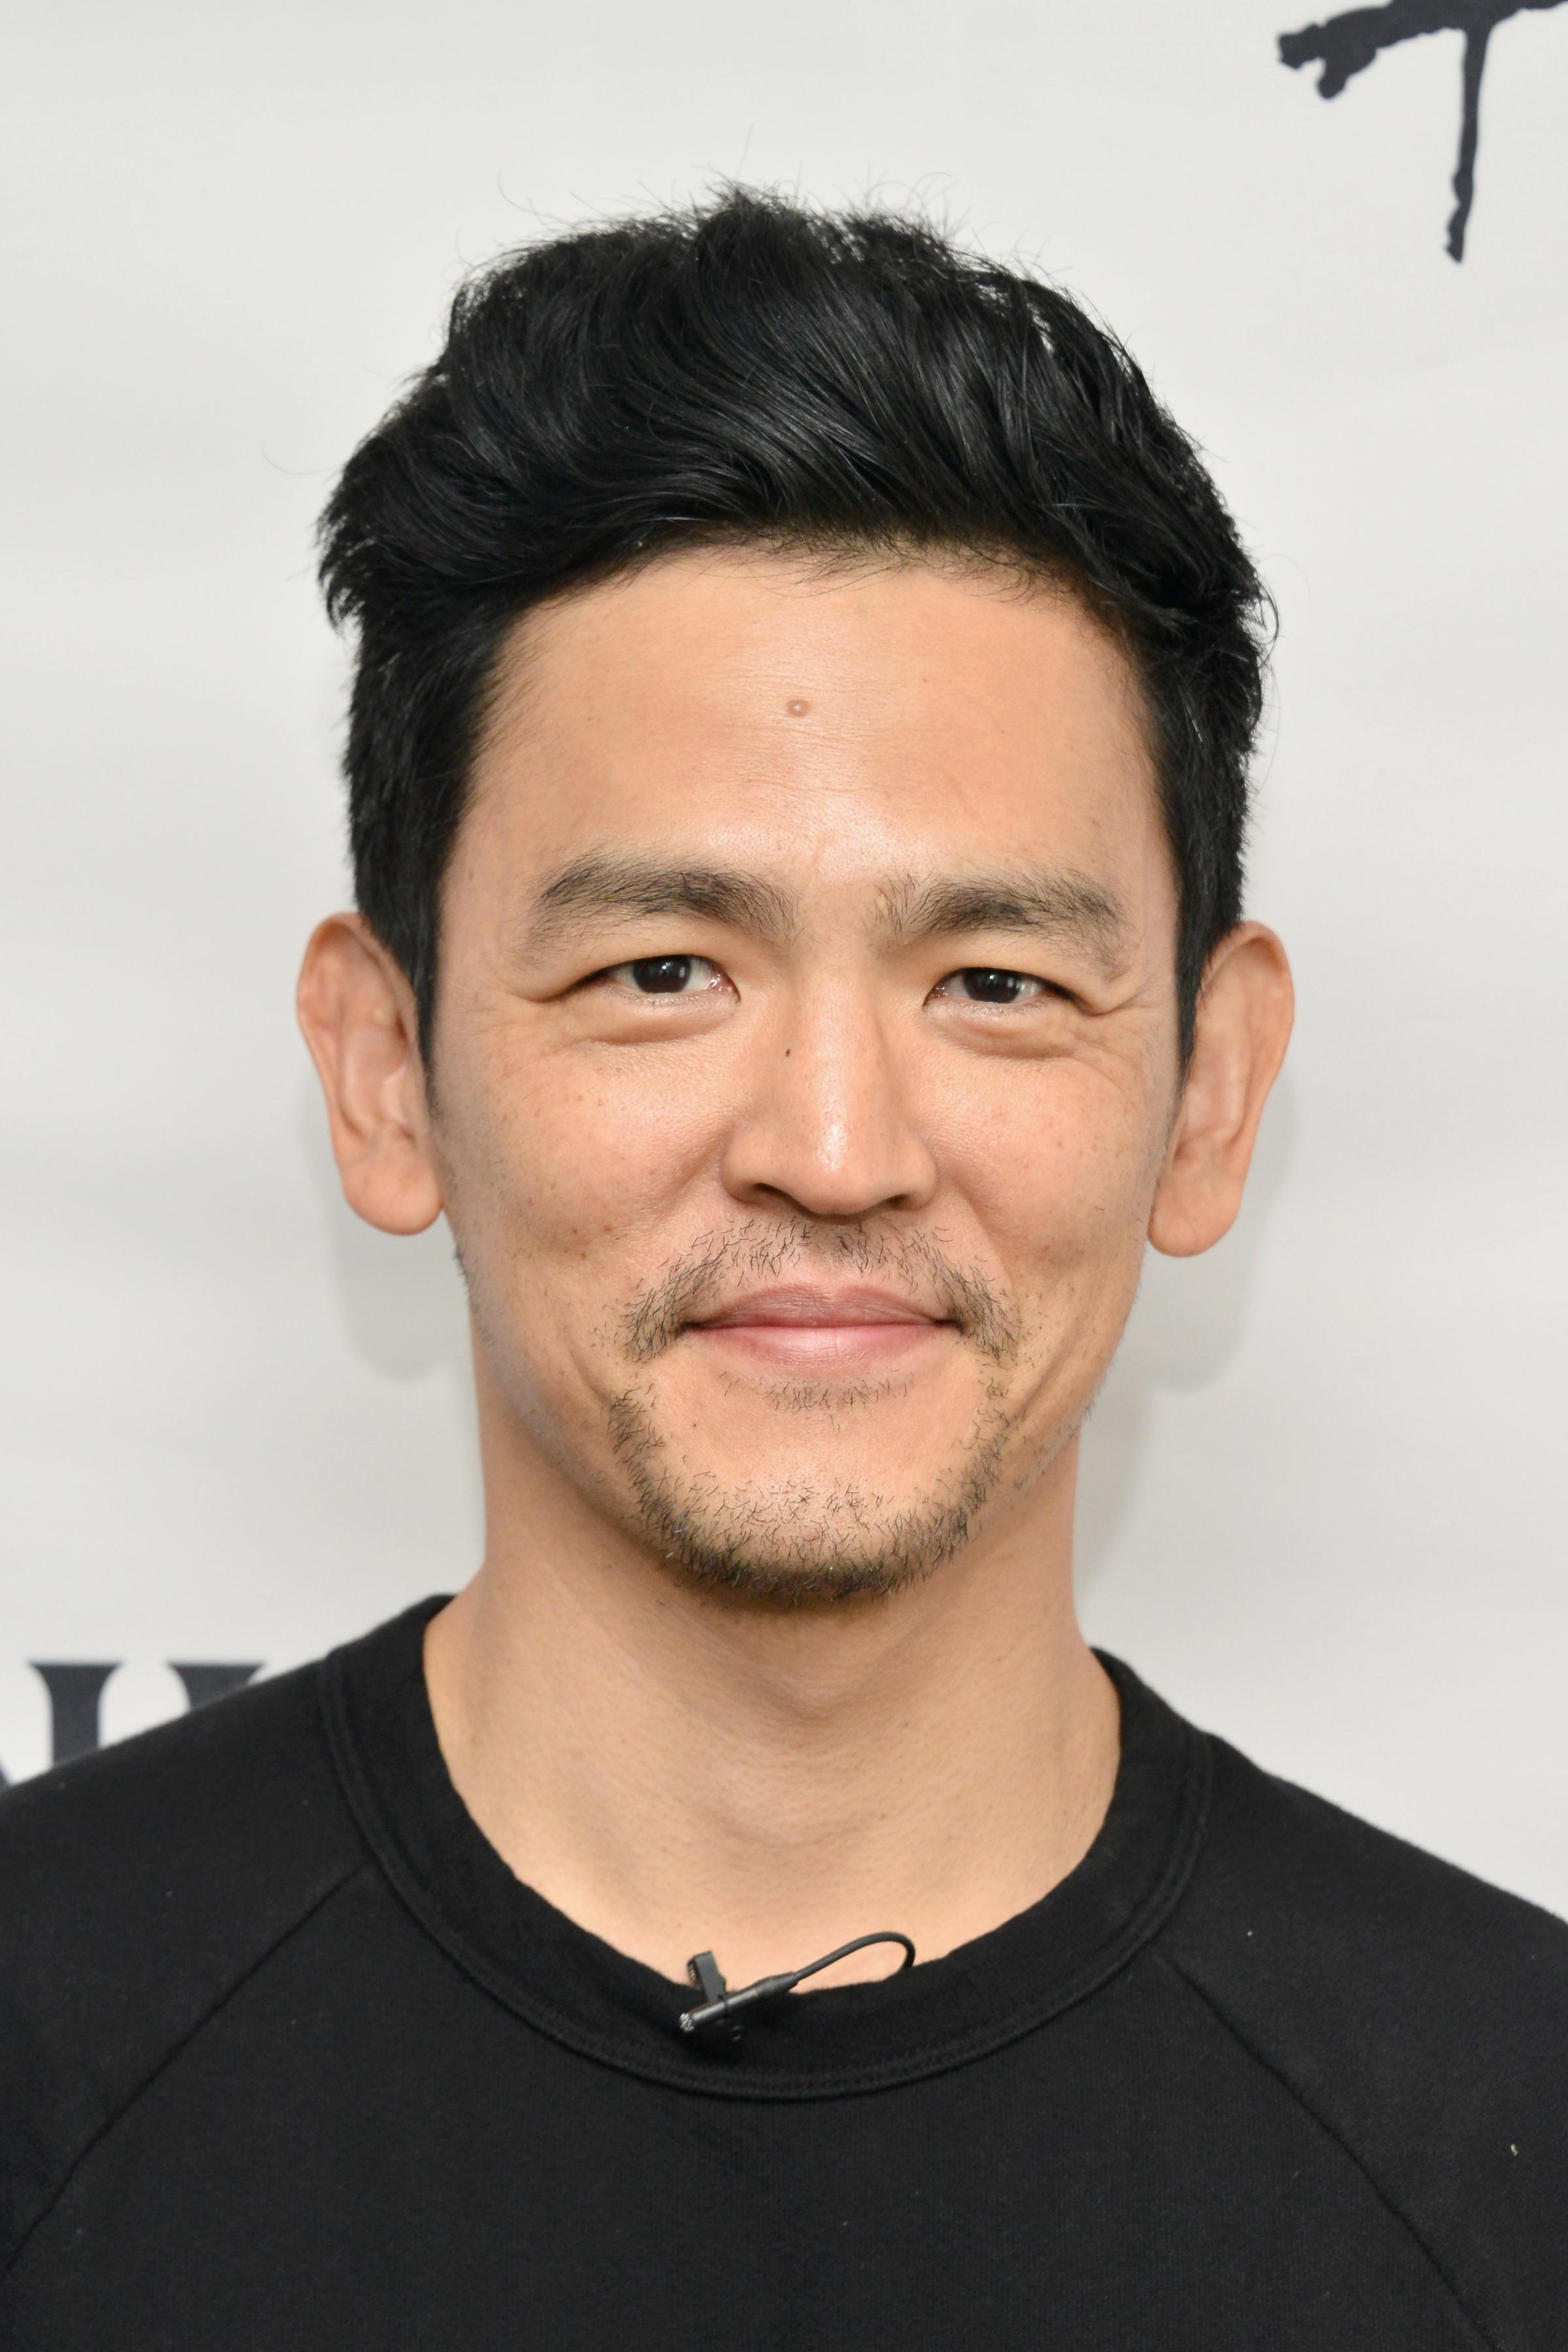 John Cho at the 2016 Los Angeles Film Festival in Culver City, Calif. on June 5, 2016.